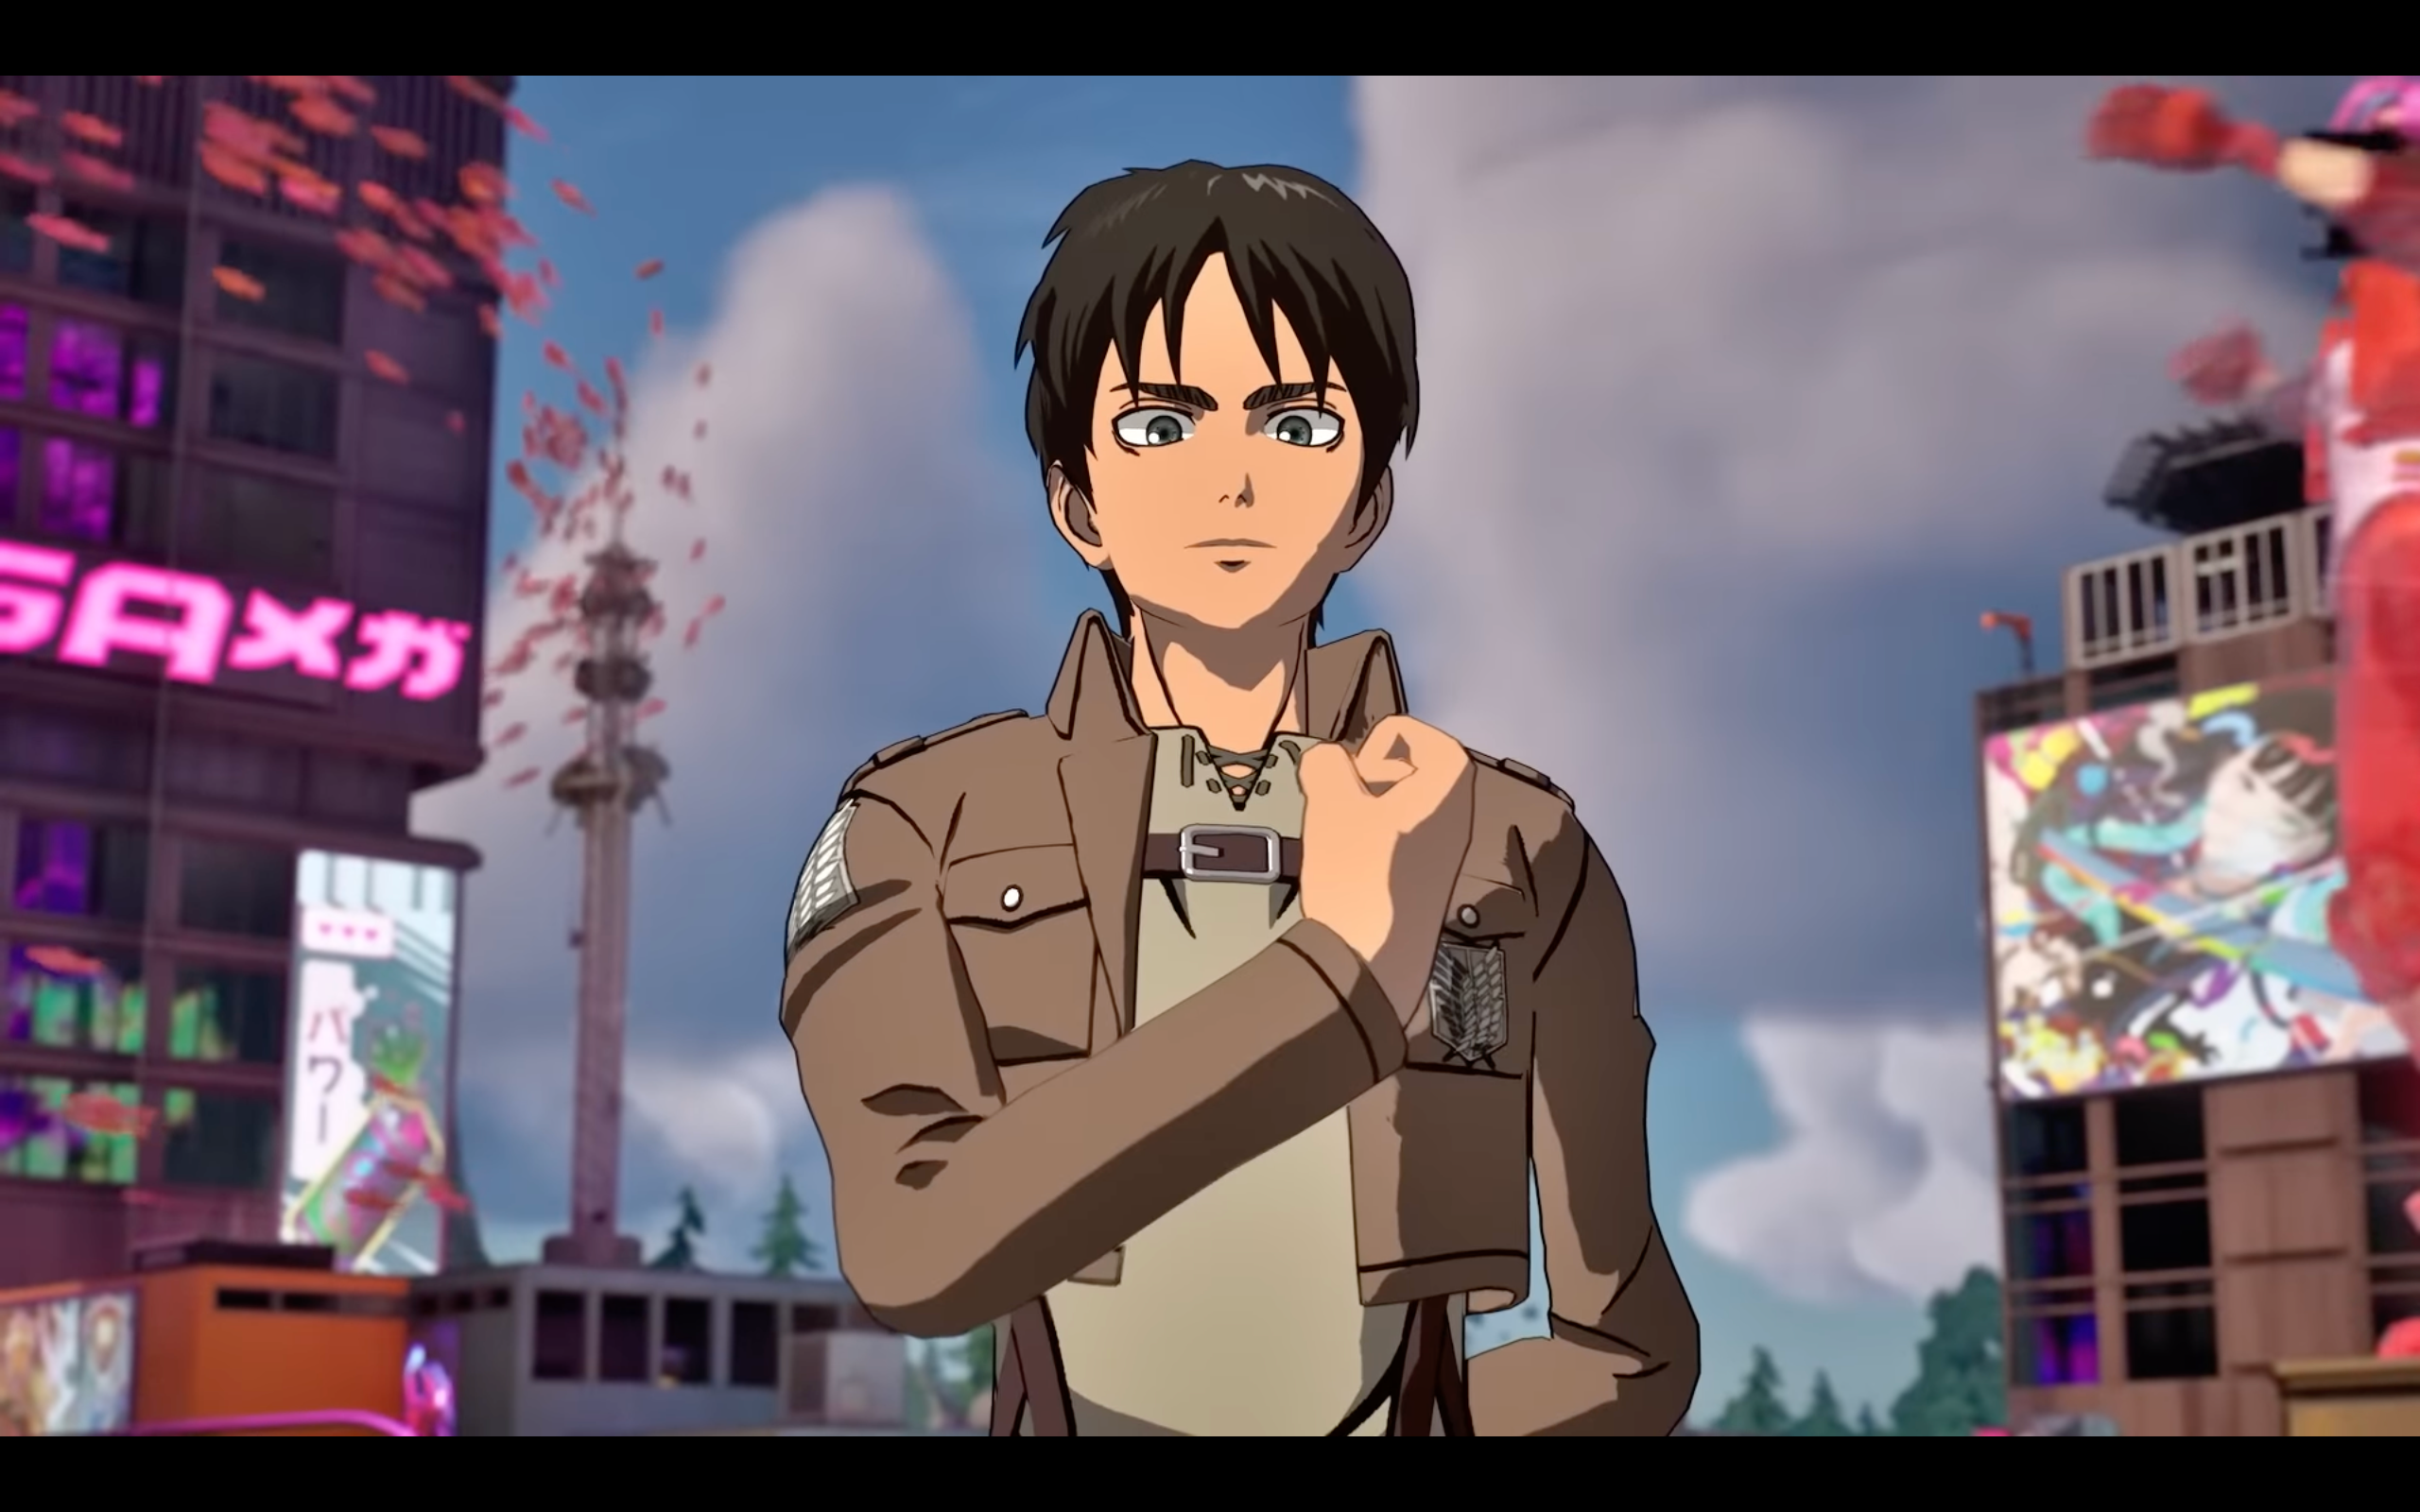 Fortnite Videos Show Attack on Titan's Eren Yeager in Action